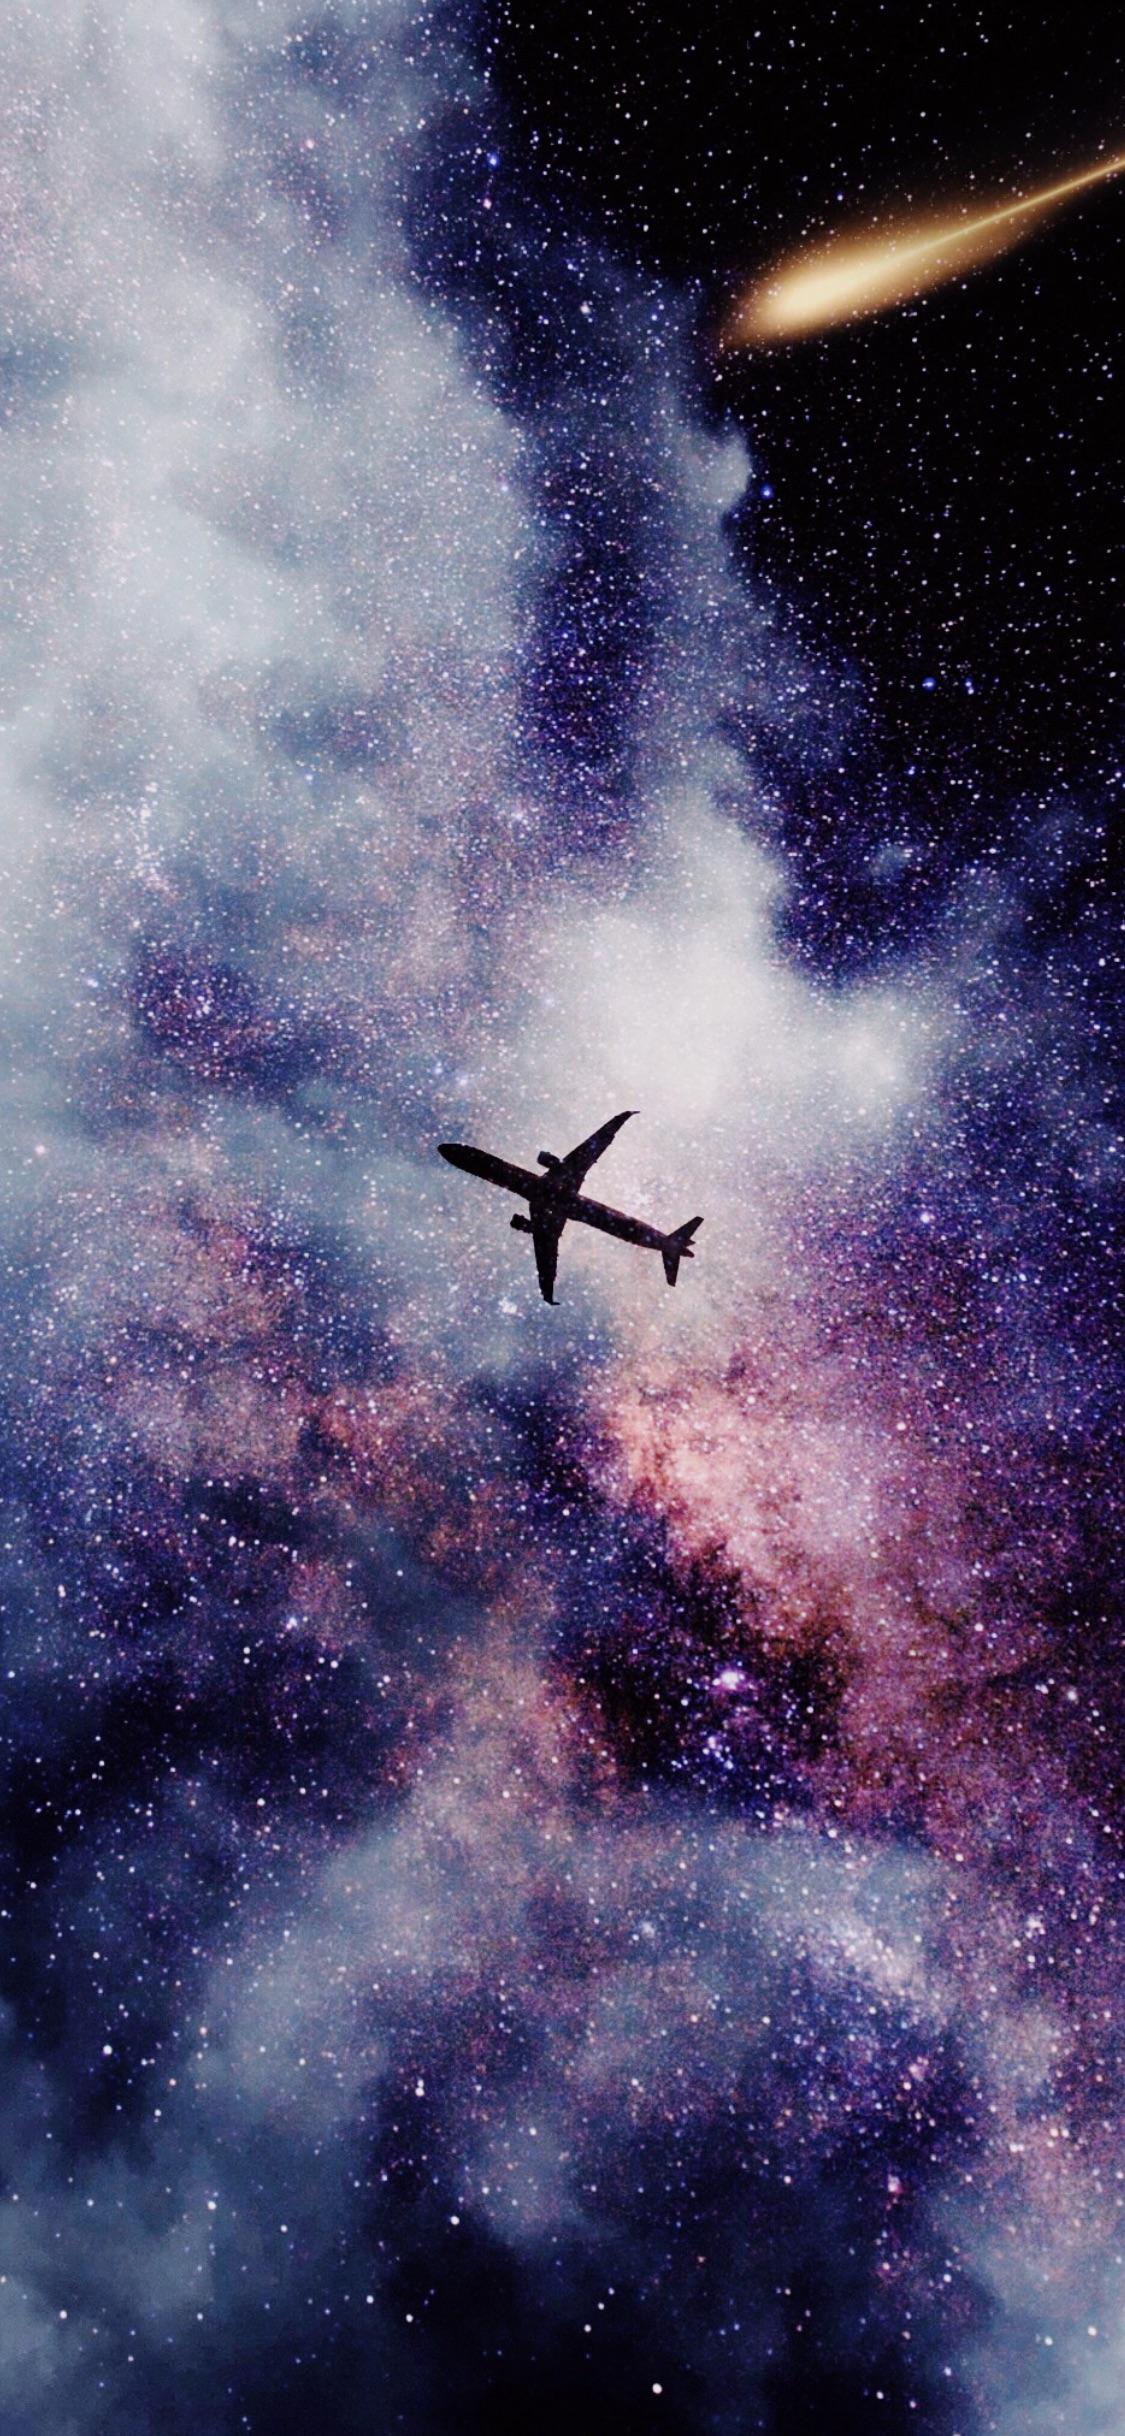 Took this photo with my iPhone X of the plane at PDX then decided to edit it and add a space theme. I do a lot of wallpaper and edits so I'm